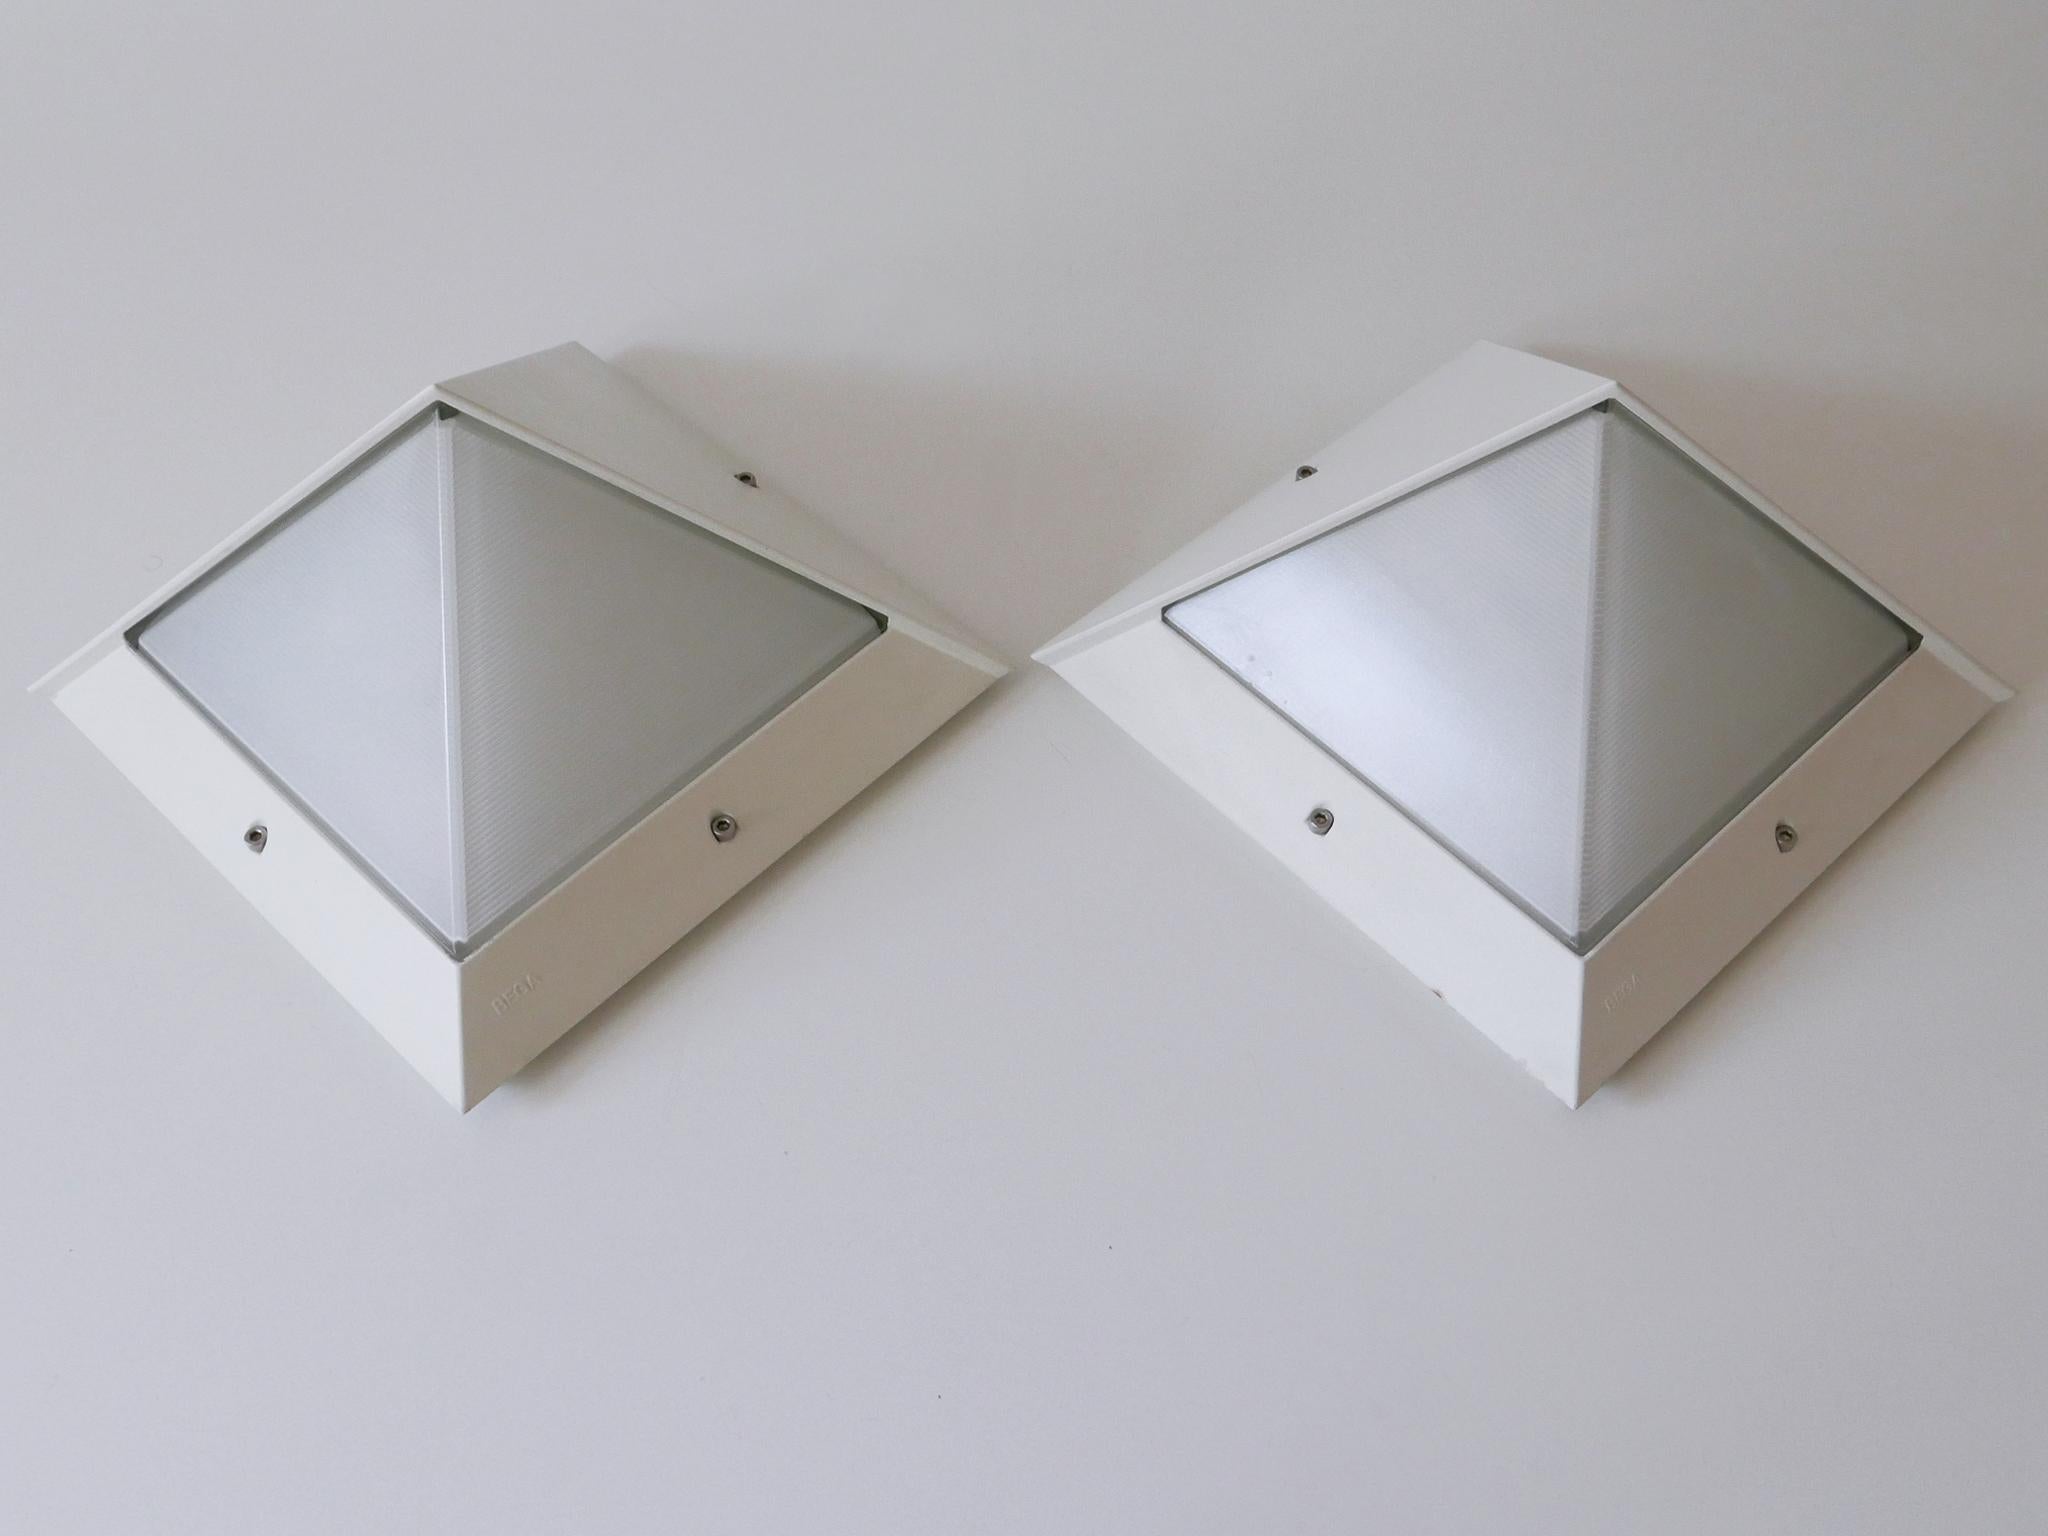 Set of Two Large Outdoor Wall Lamps or Sconces by BEGA, 1980s, Germany For Sale 8